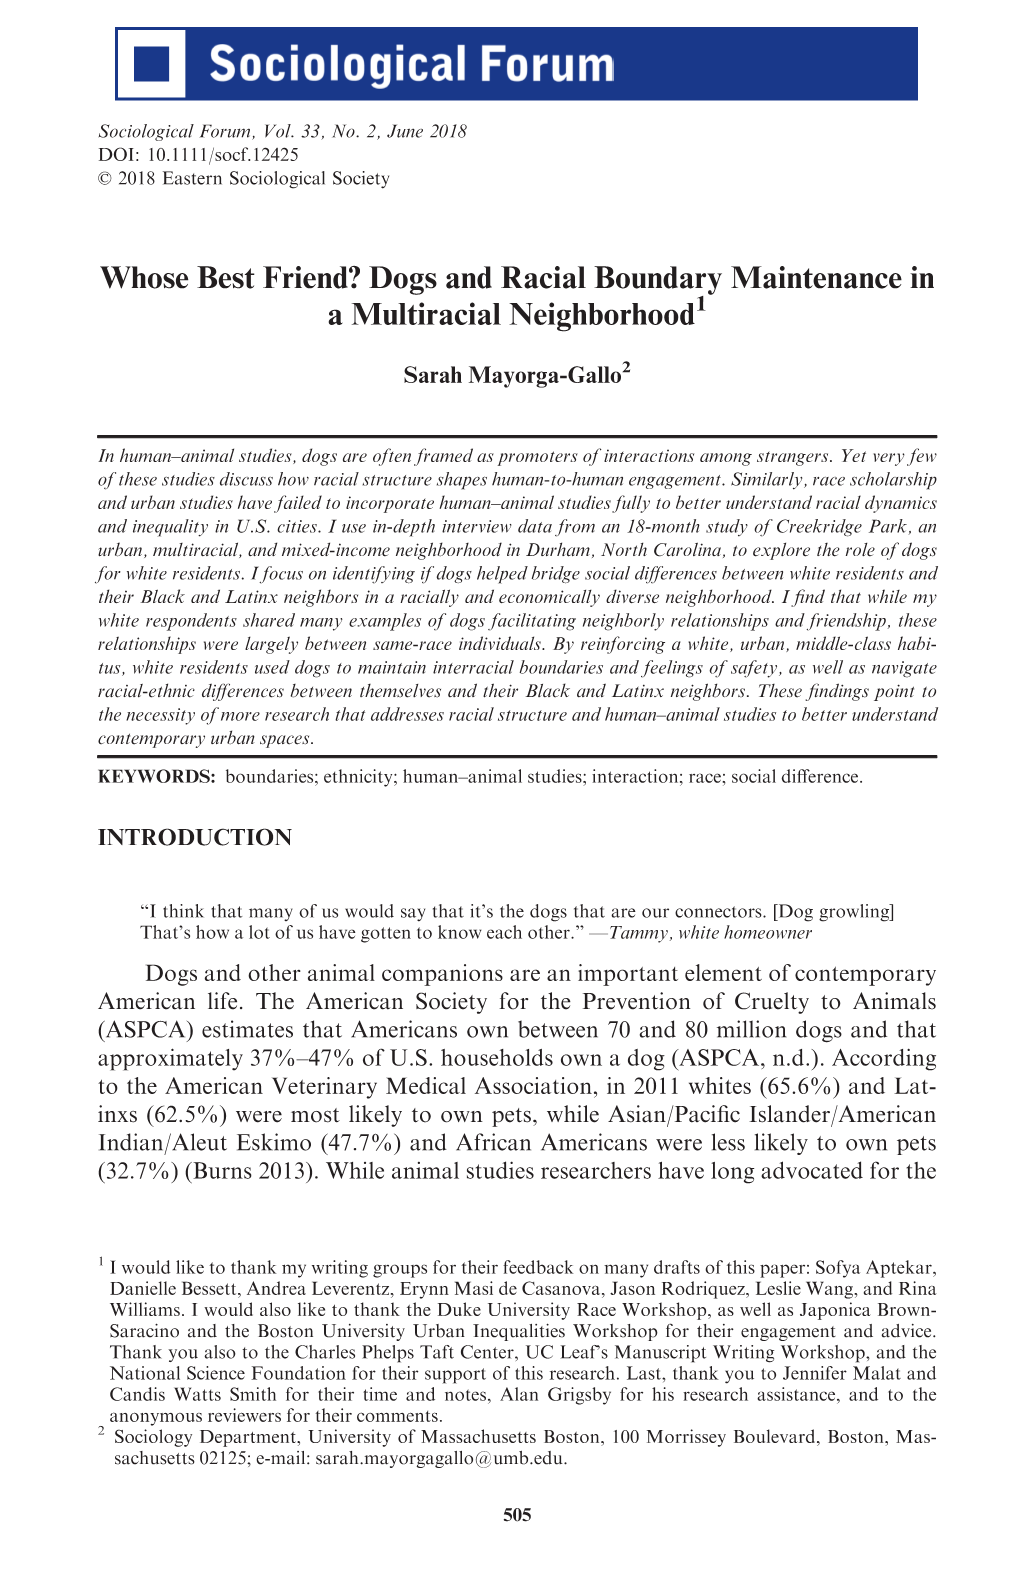 Whose Best Friend? Dogs and Racial Boundary Maintenance in a Multiracial Neighborhood1